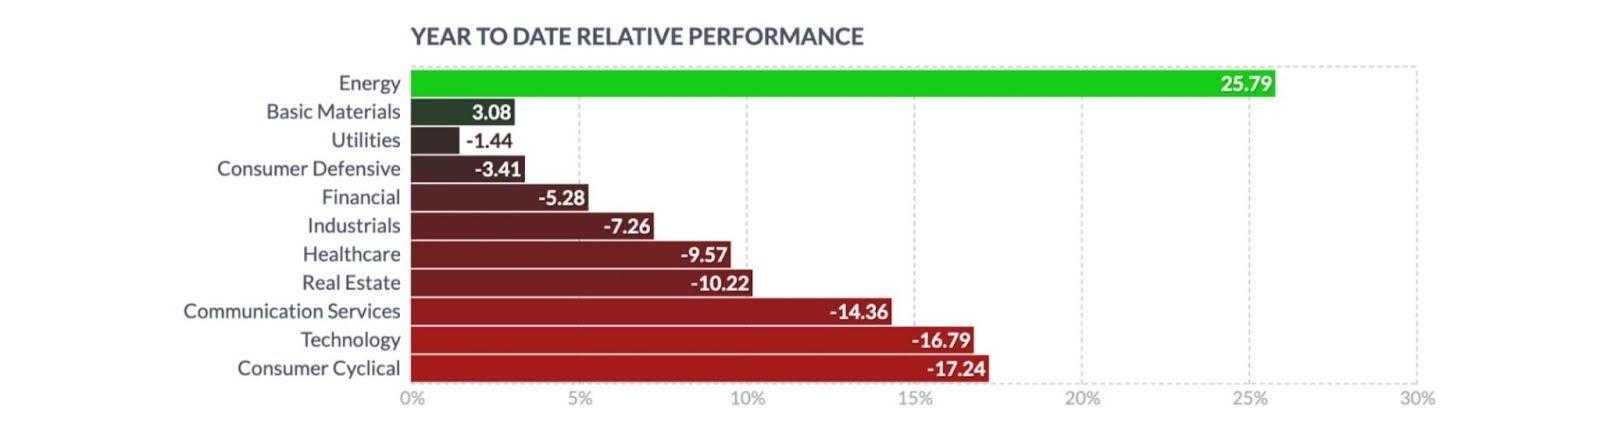 Year to date relative performance of each market sector